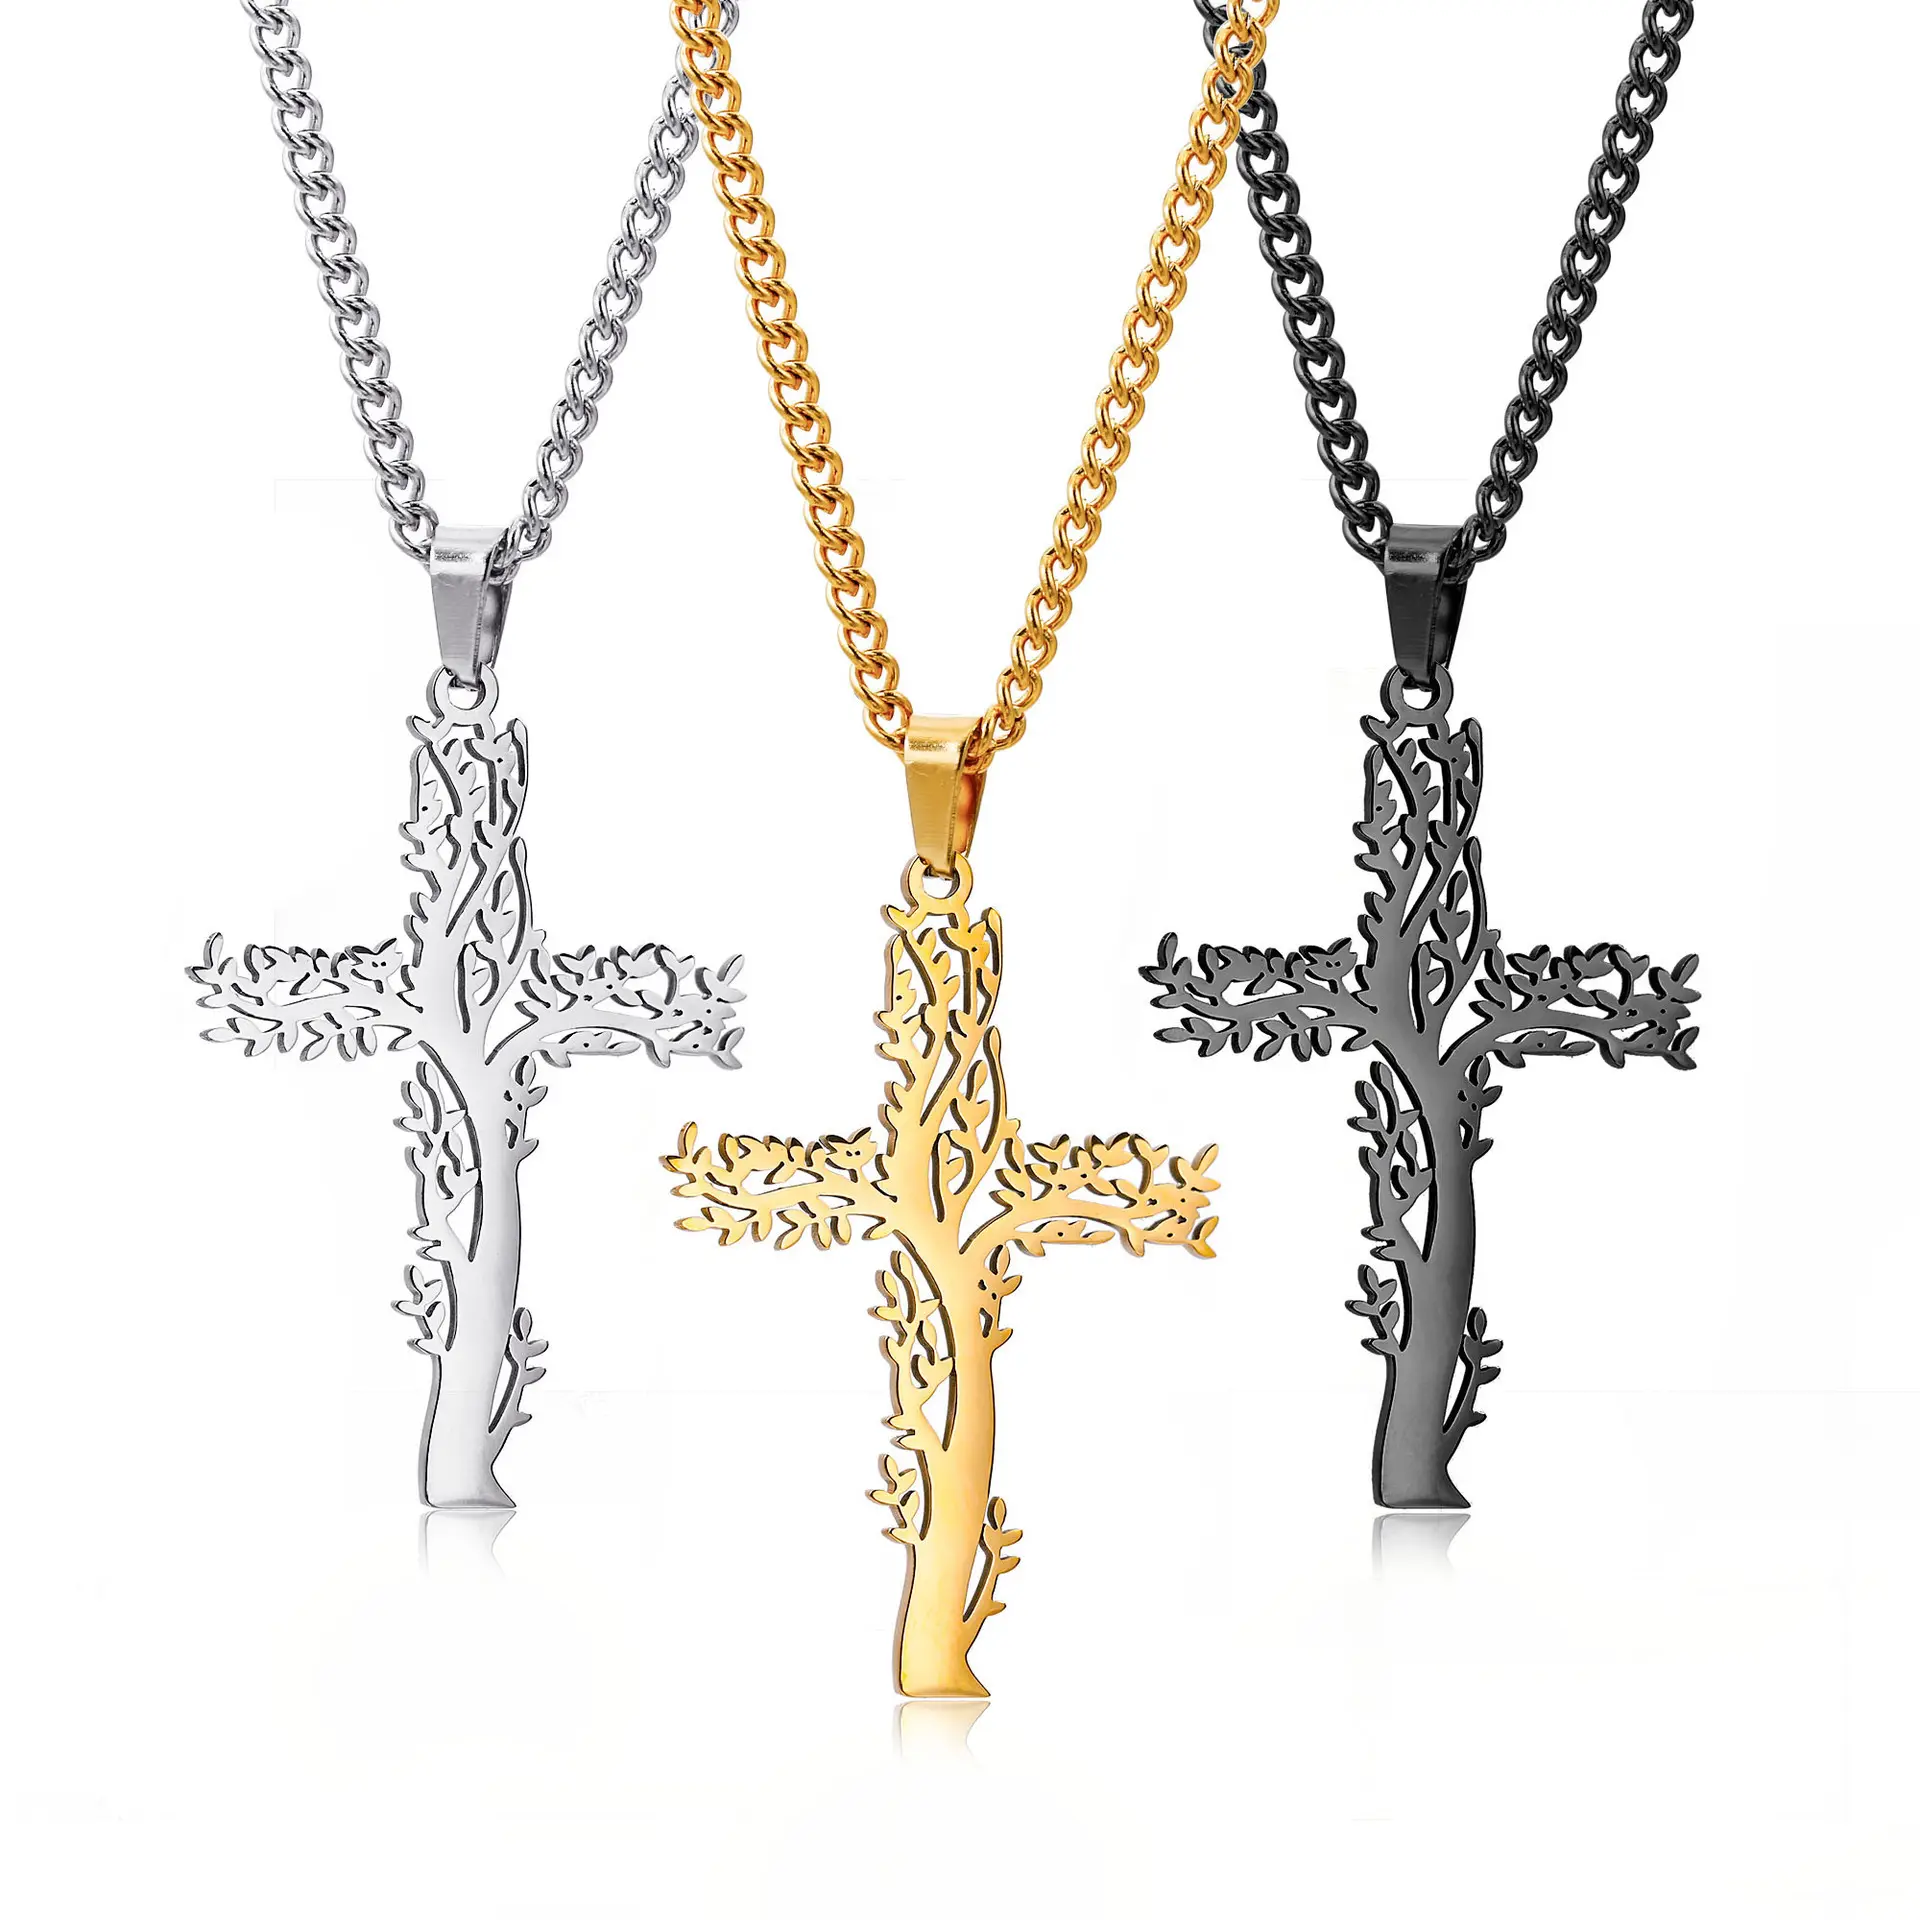 Life Tree Male Cross Faith Based Religious Pendant Fine Fashion Necklaces for Men Stainless Steel Christian Jewelry Wholesale